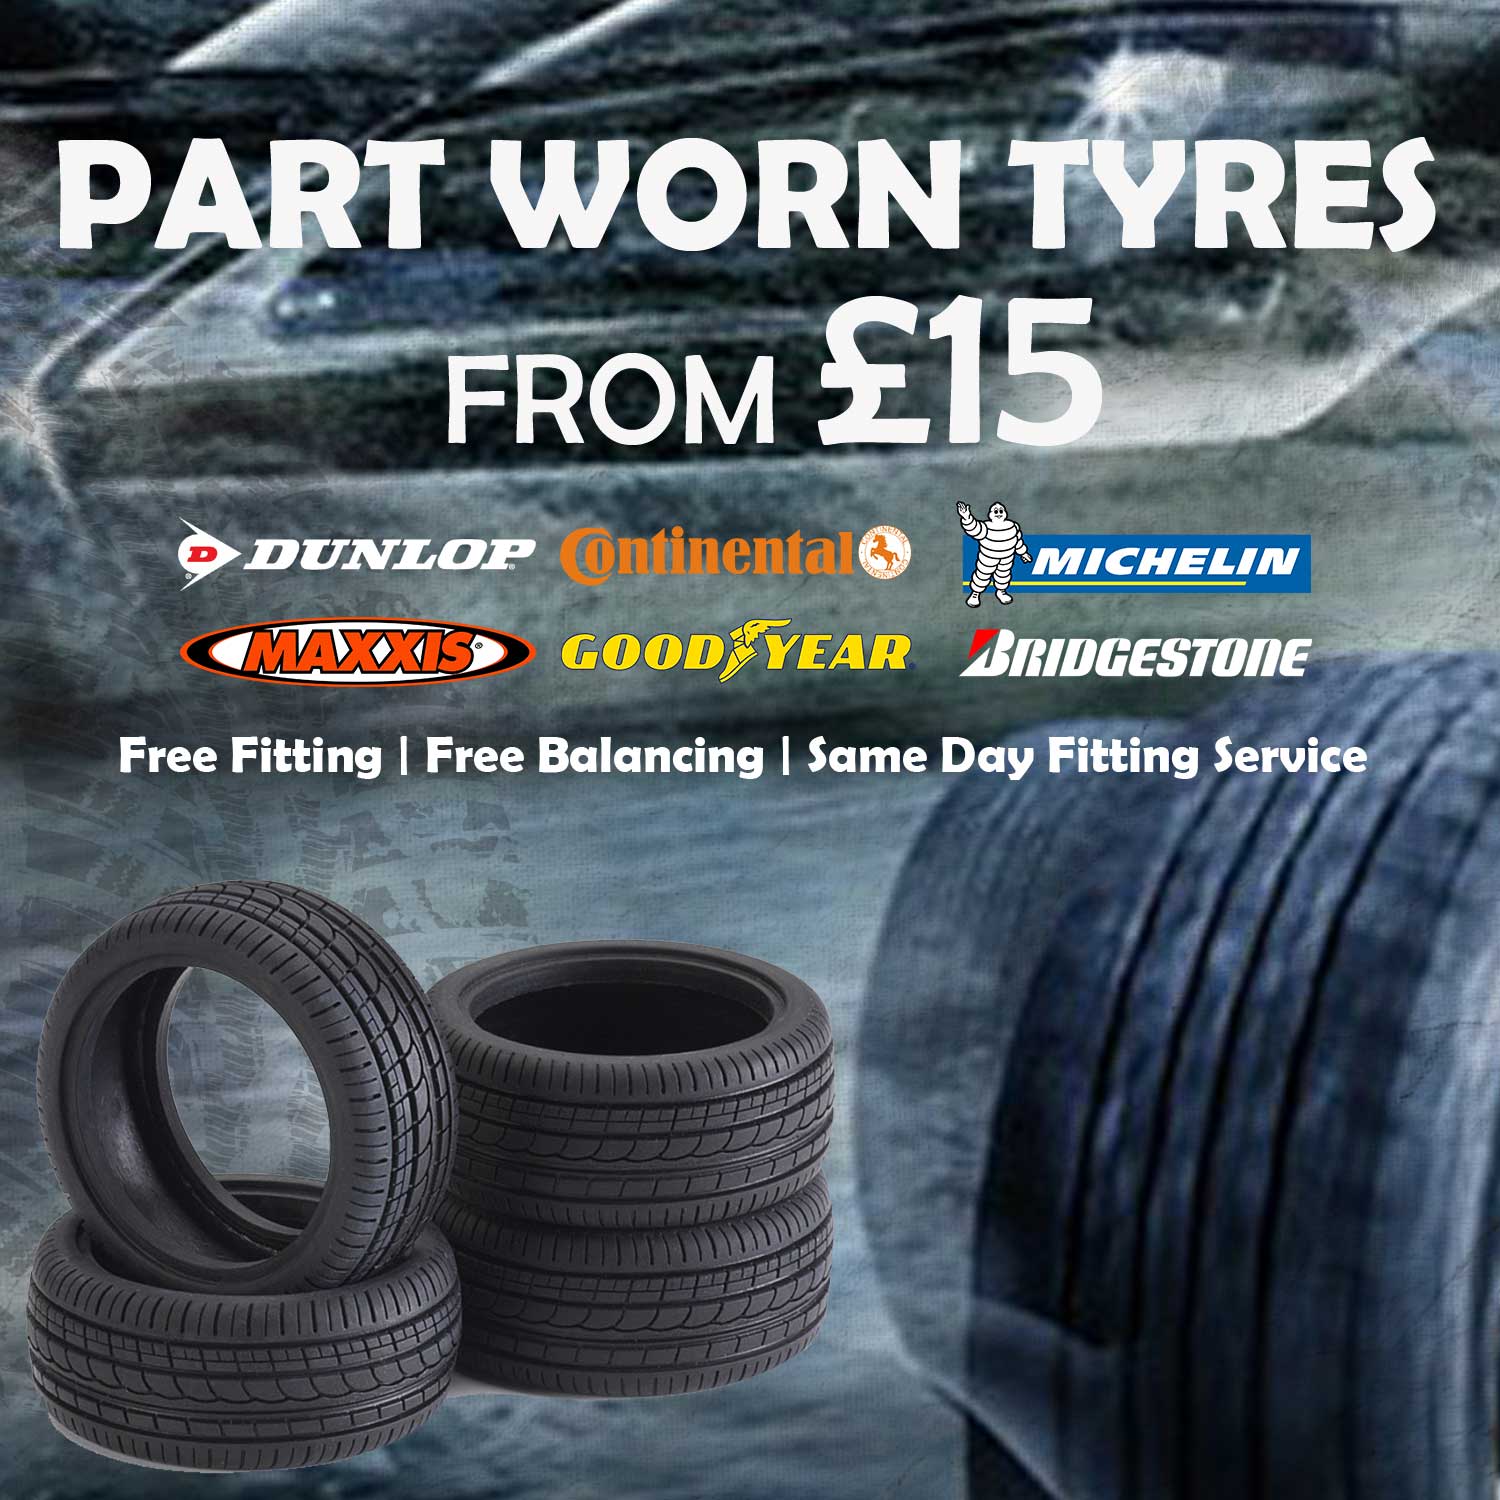 Part Worn Tyres in Nelson, Bradford, Burnley and Manchester